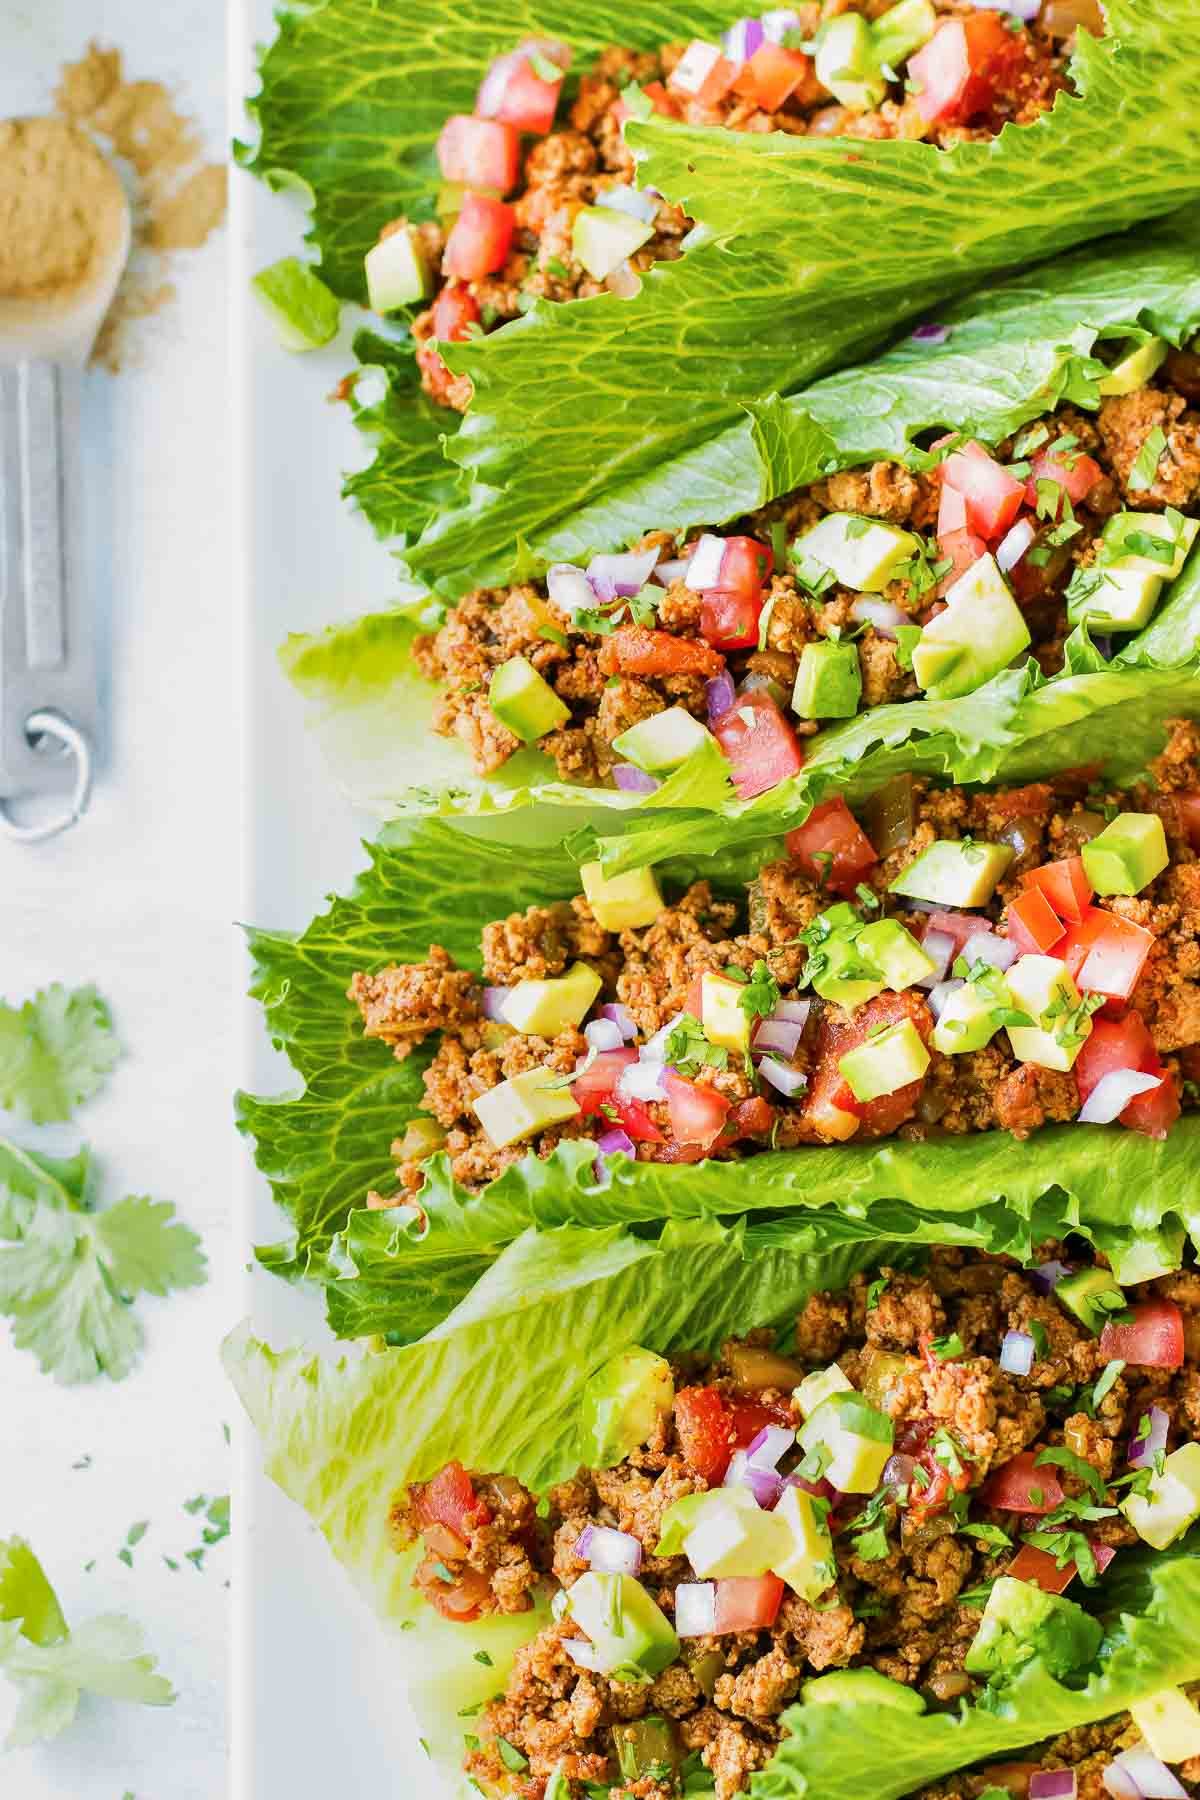 A row of taco lettuce wraps on a white plate.